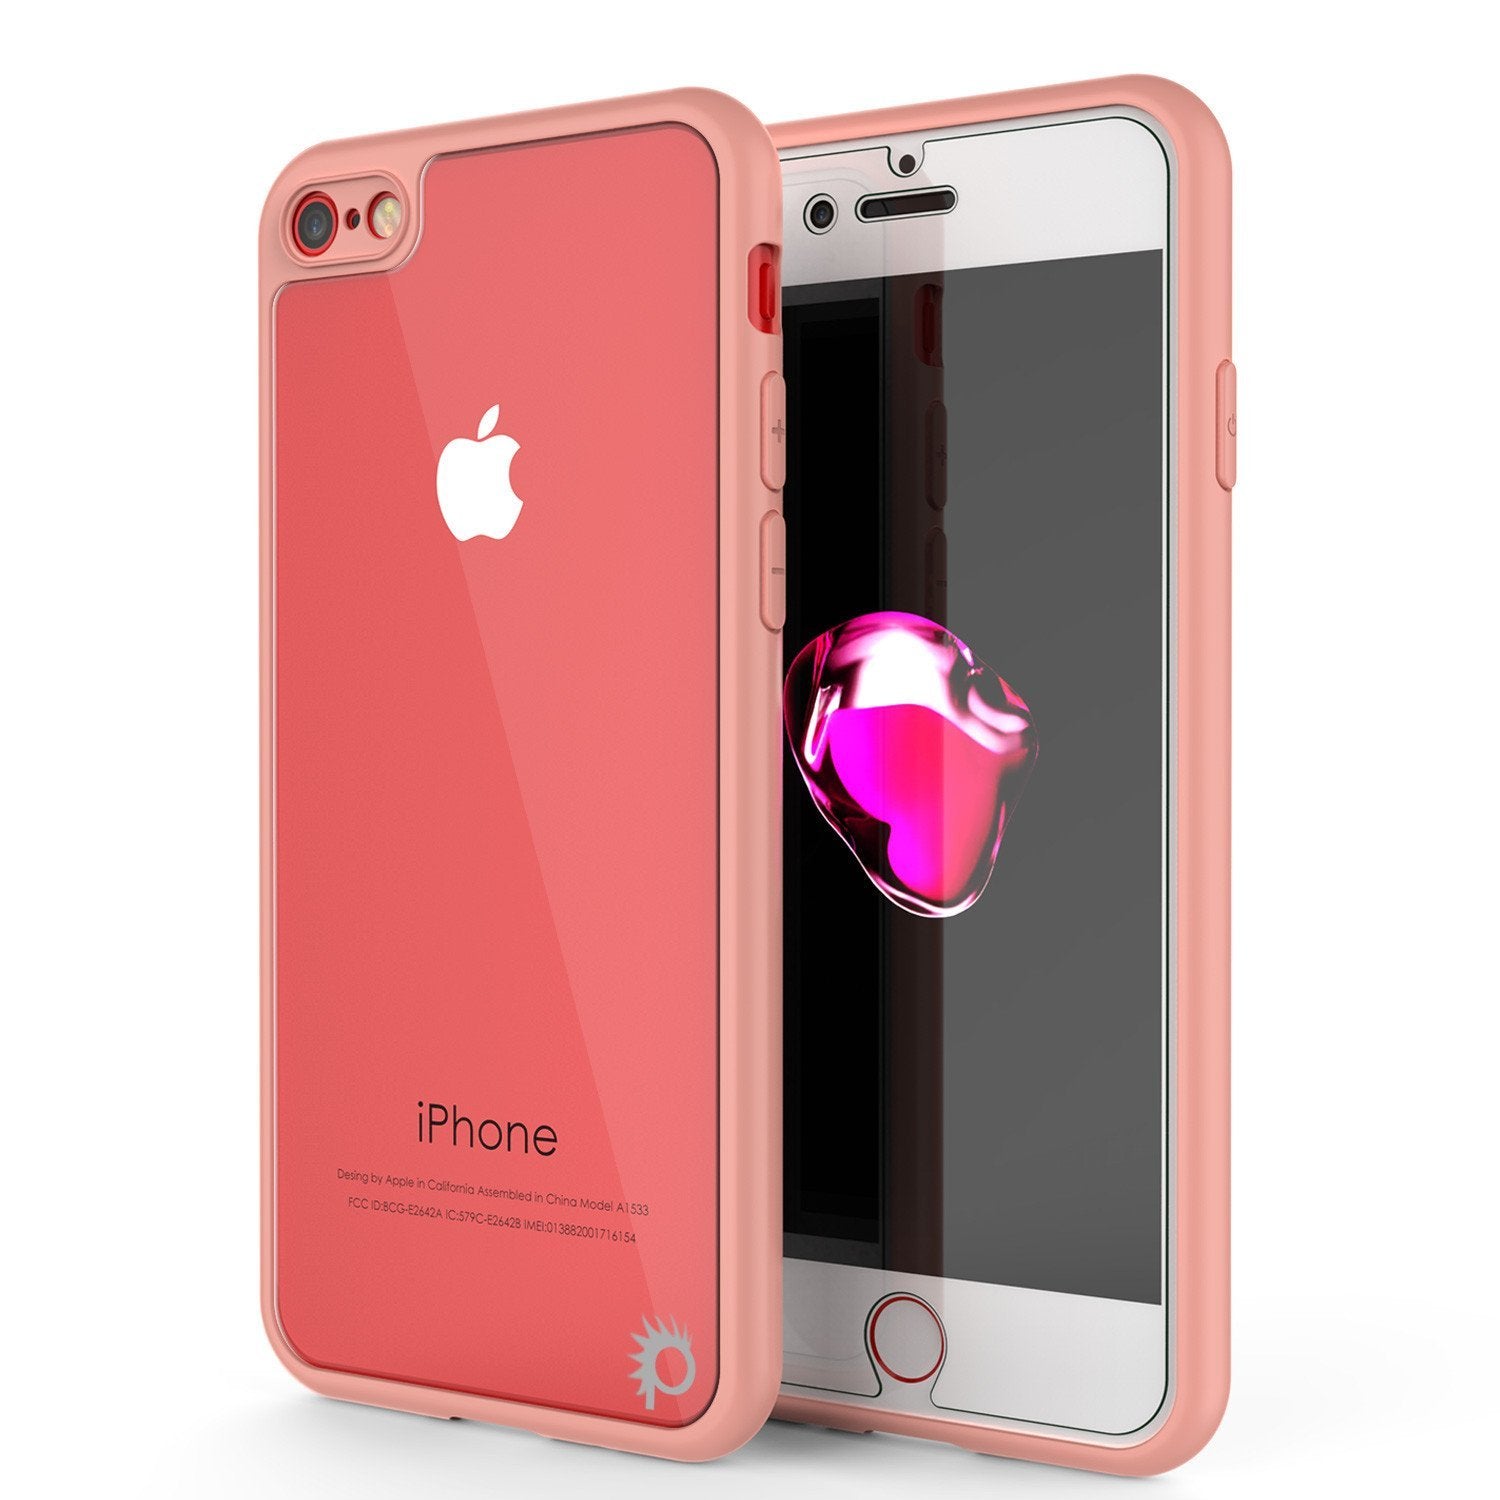 iPhone 8 Case [MASK Series] [PINK] Full Body Hybrid Dual Layer TPU Cover W/ protective Tempered Glass Screen Protector